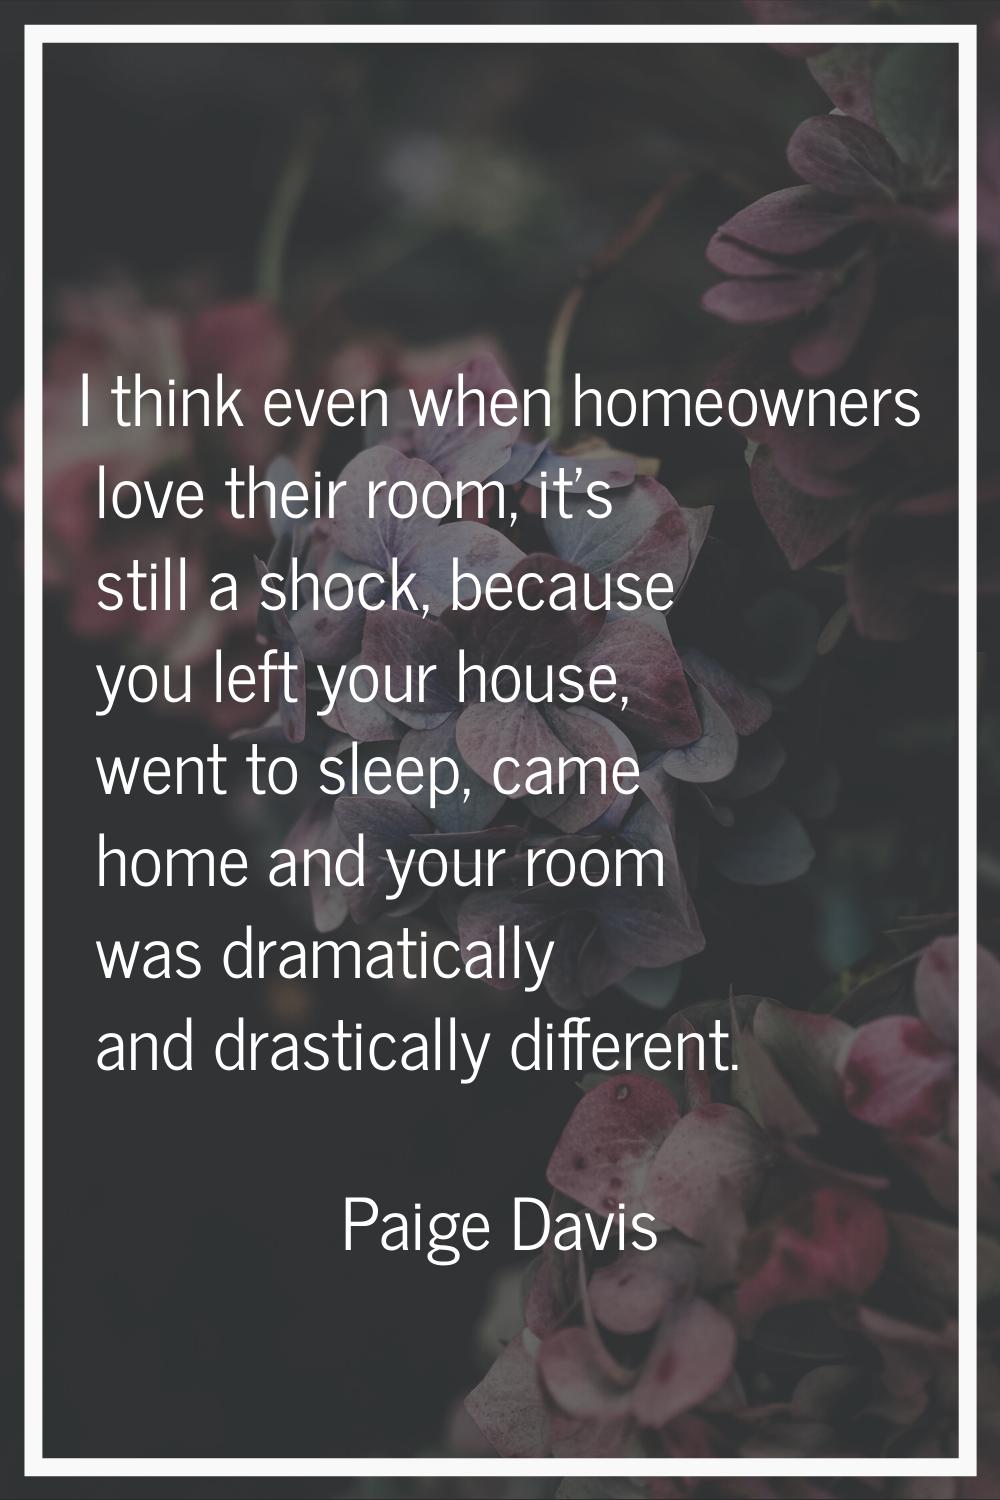 I think even when homeowners love their room, it's still a shock, because you left your house, went